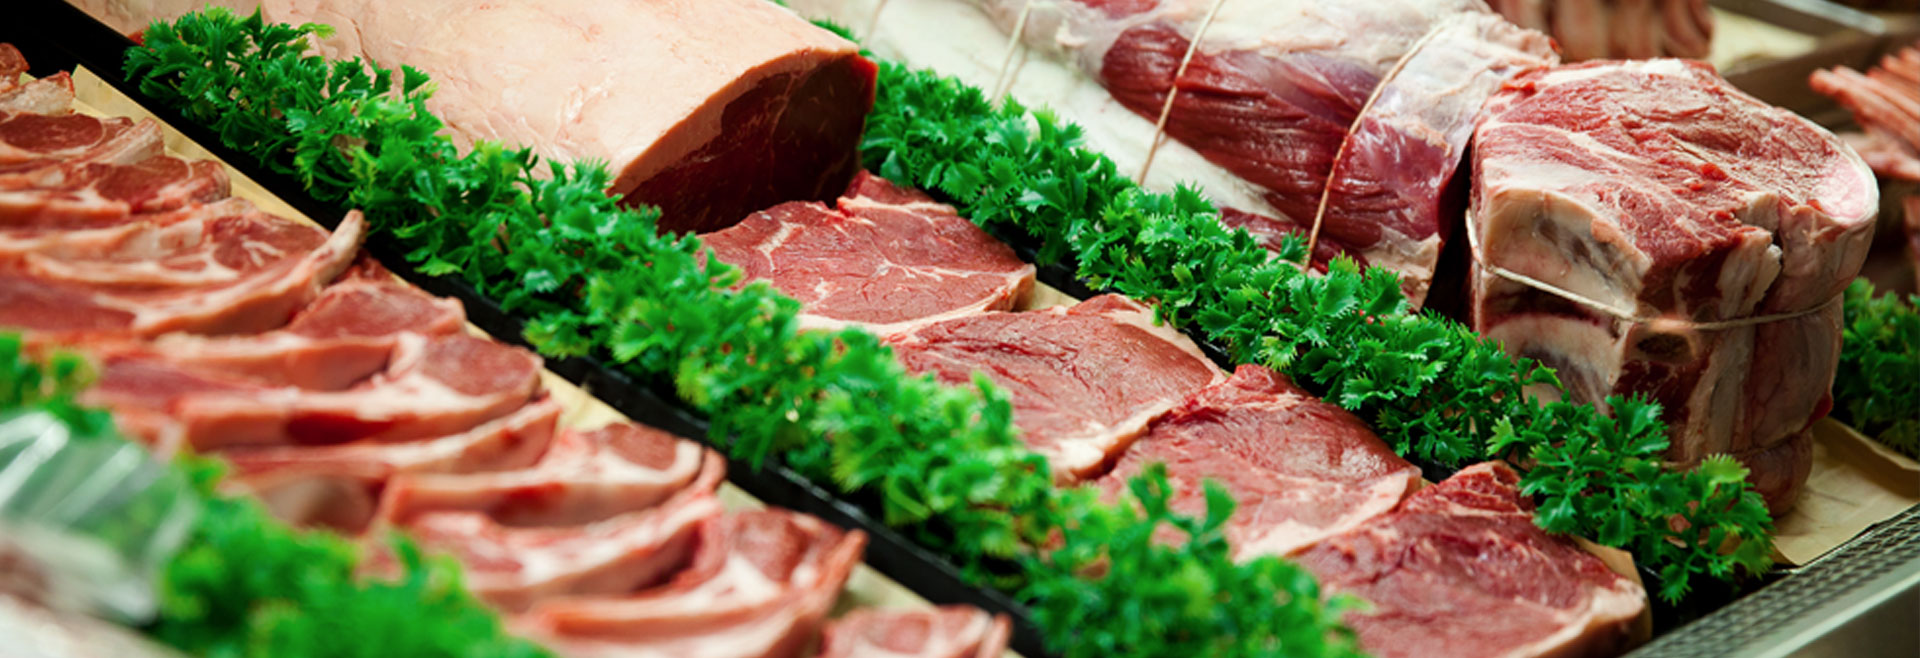 From our butcher header decorative image